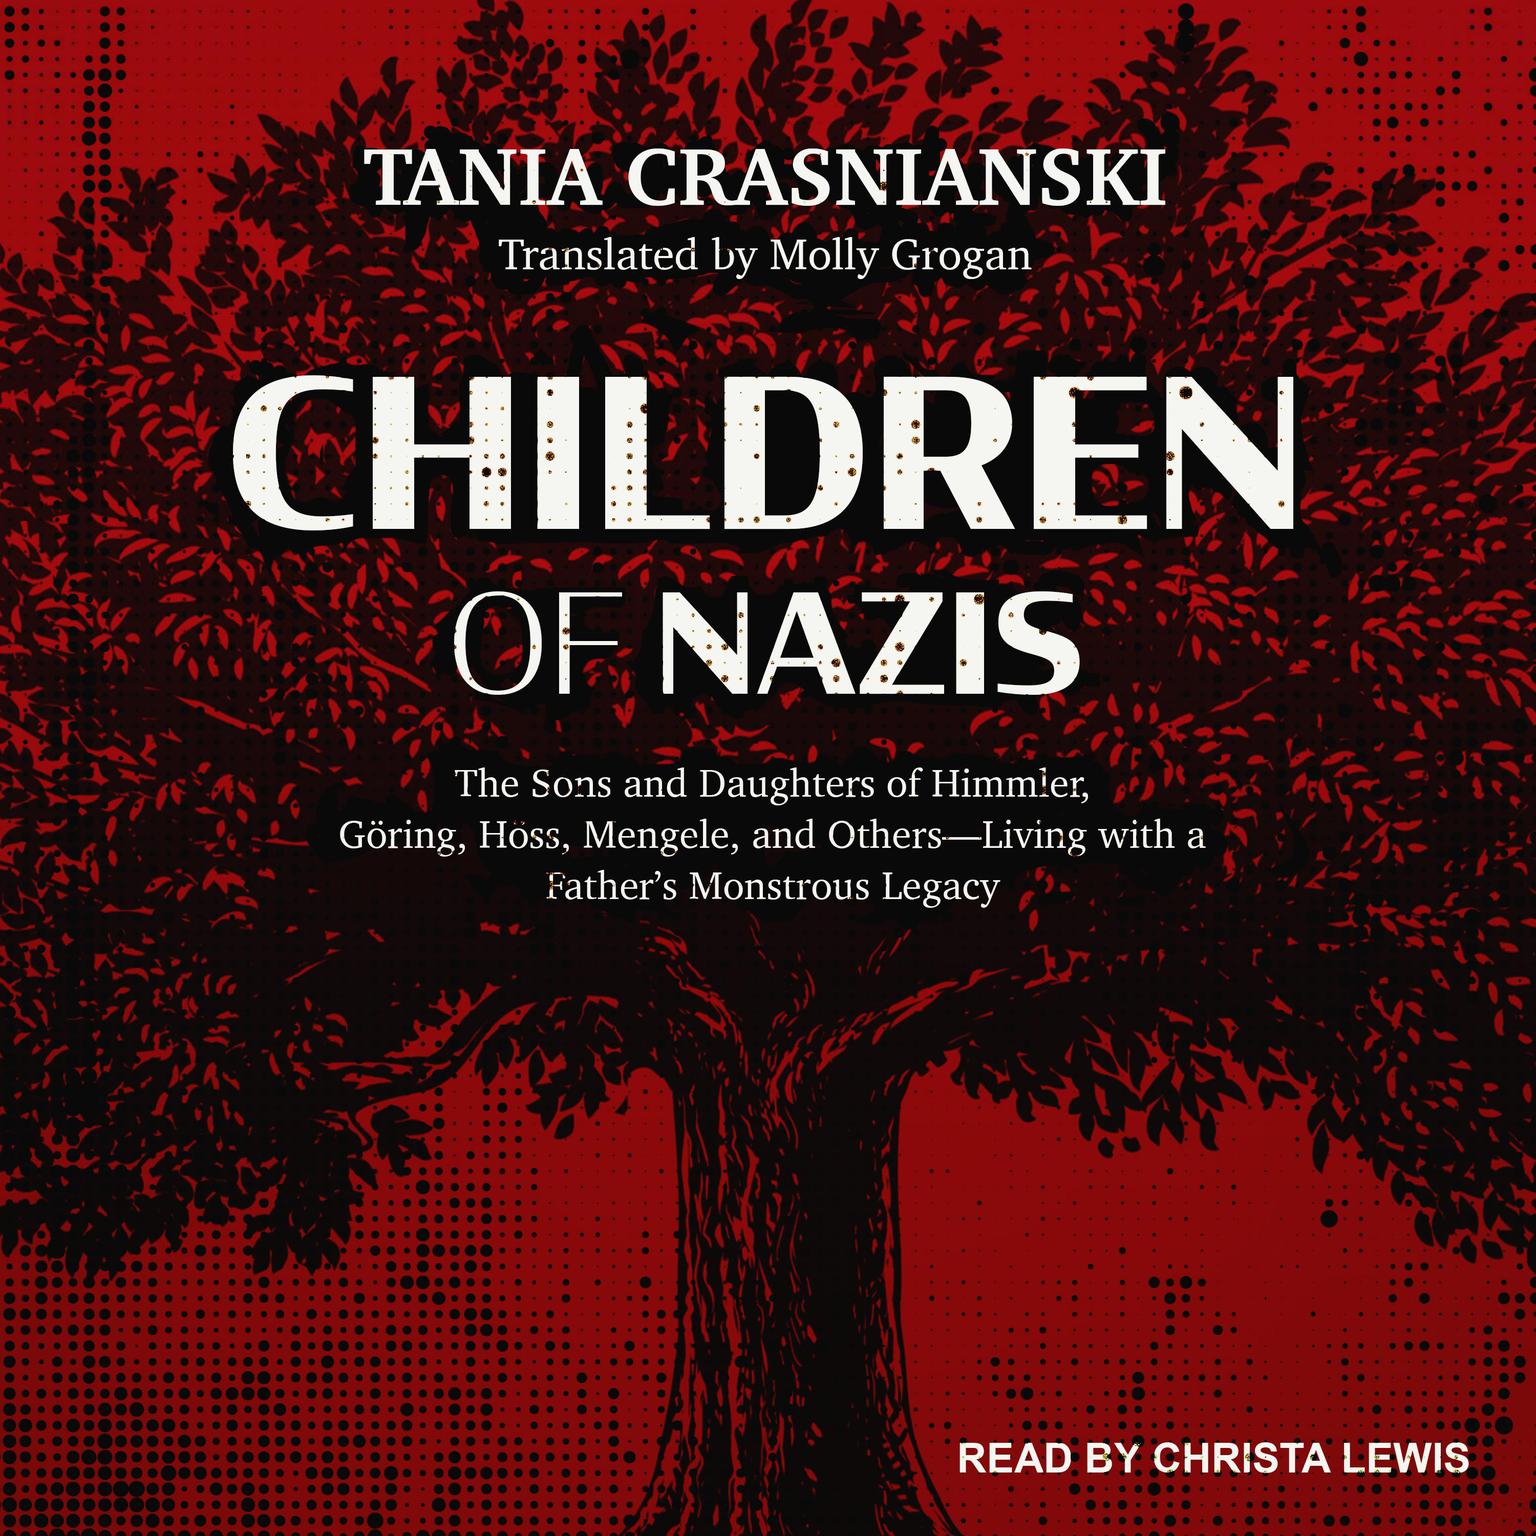 Children of Nazis: The Sons and Daughters of Himmler, Göring, Höss, Mengele, and Others-Living with a Father’s Monstrous Legacy Audiobook, by Tania Crasnianski